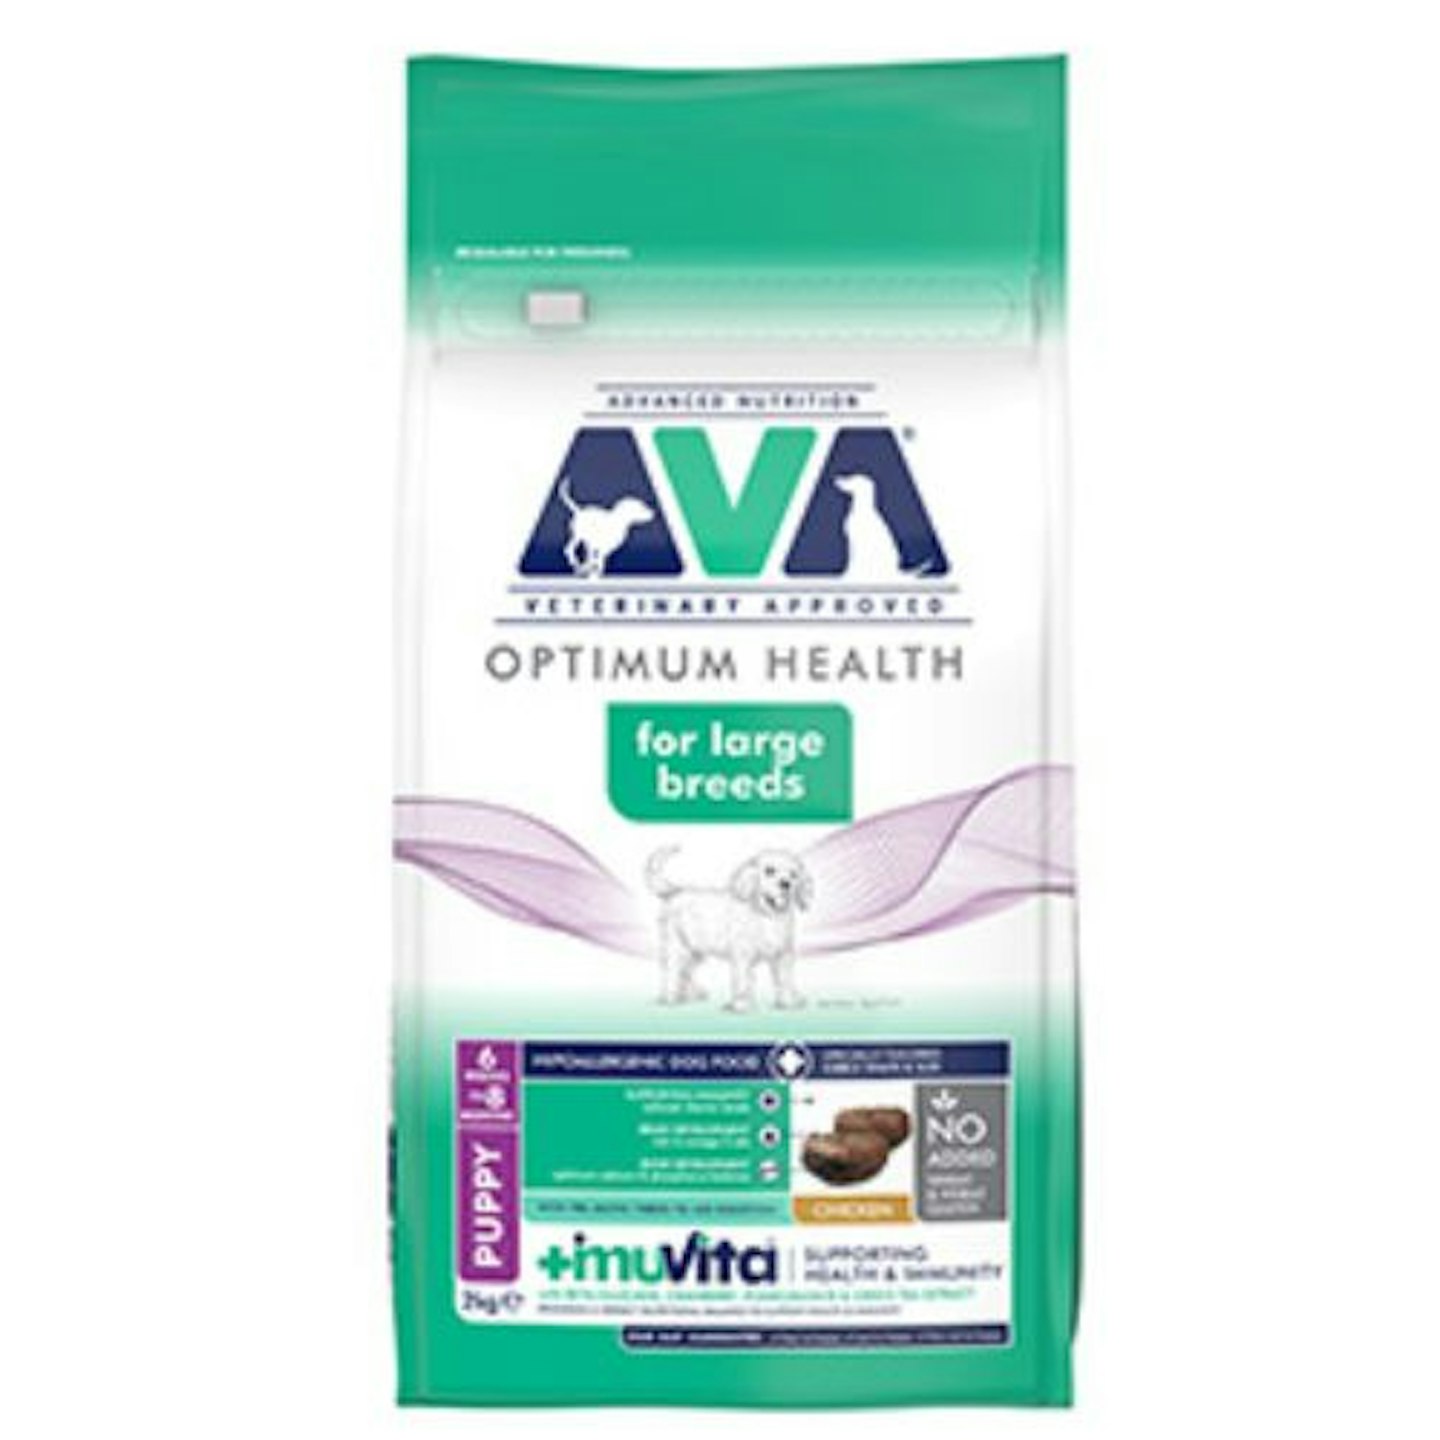 AVA Veterinary Approved Optimum Health Large Breed Dry Puppy Food Chicken, 2kg